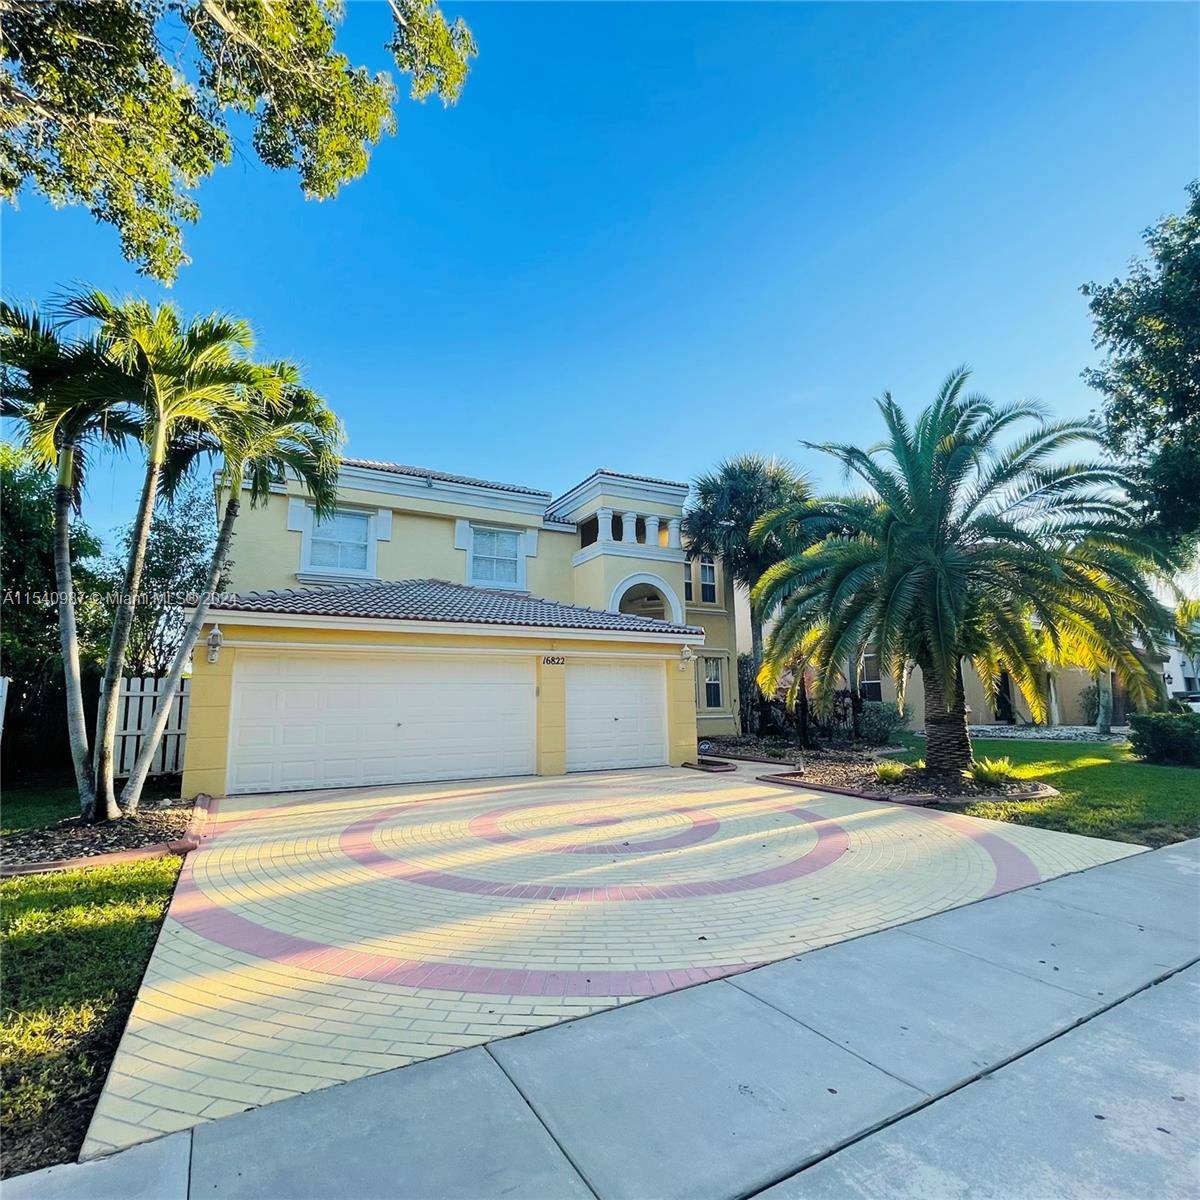 Beautiful 5 3. 5 Bedroom Den, 3 car garage, pool lake view home located in cul de sac of the exclusive community of Riviera Isles.